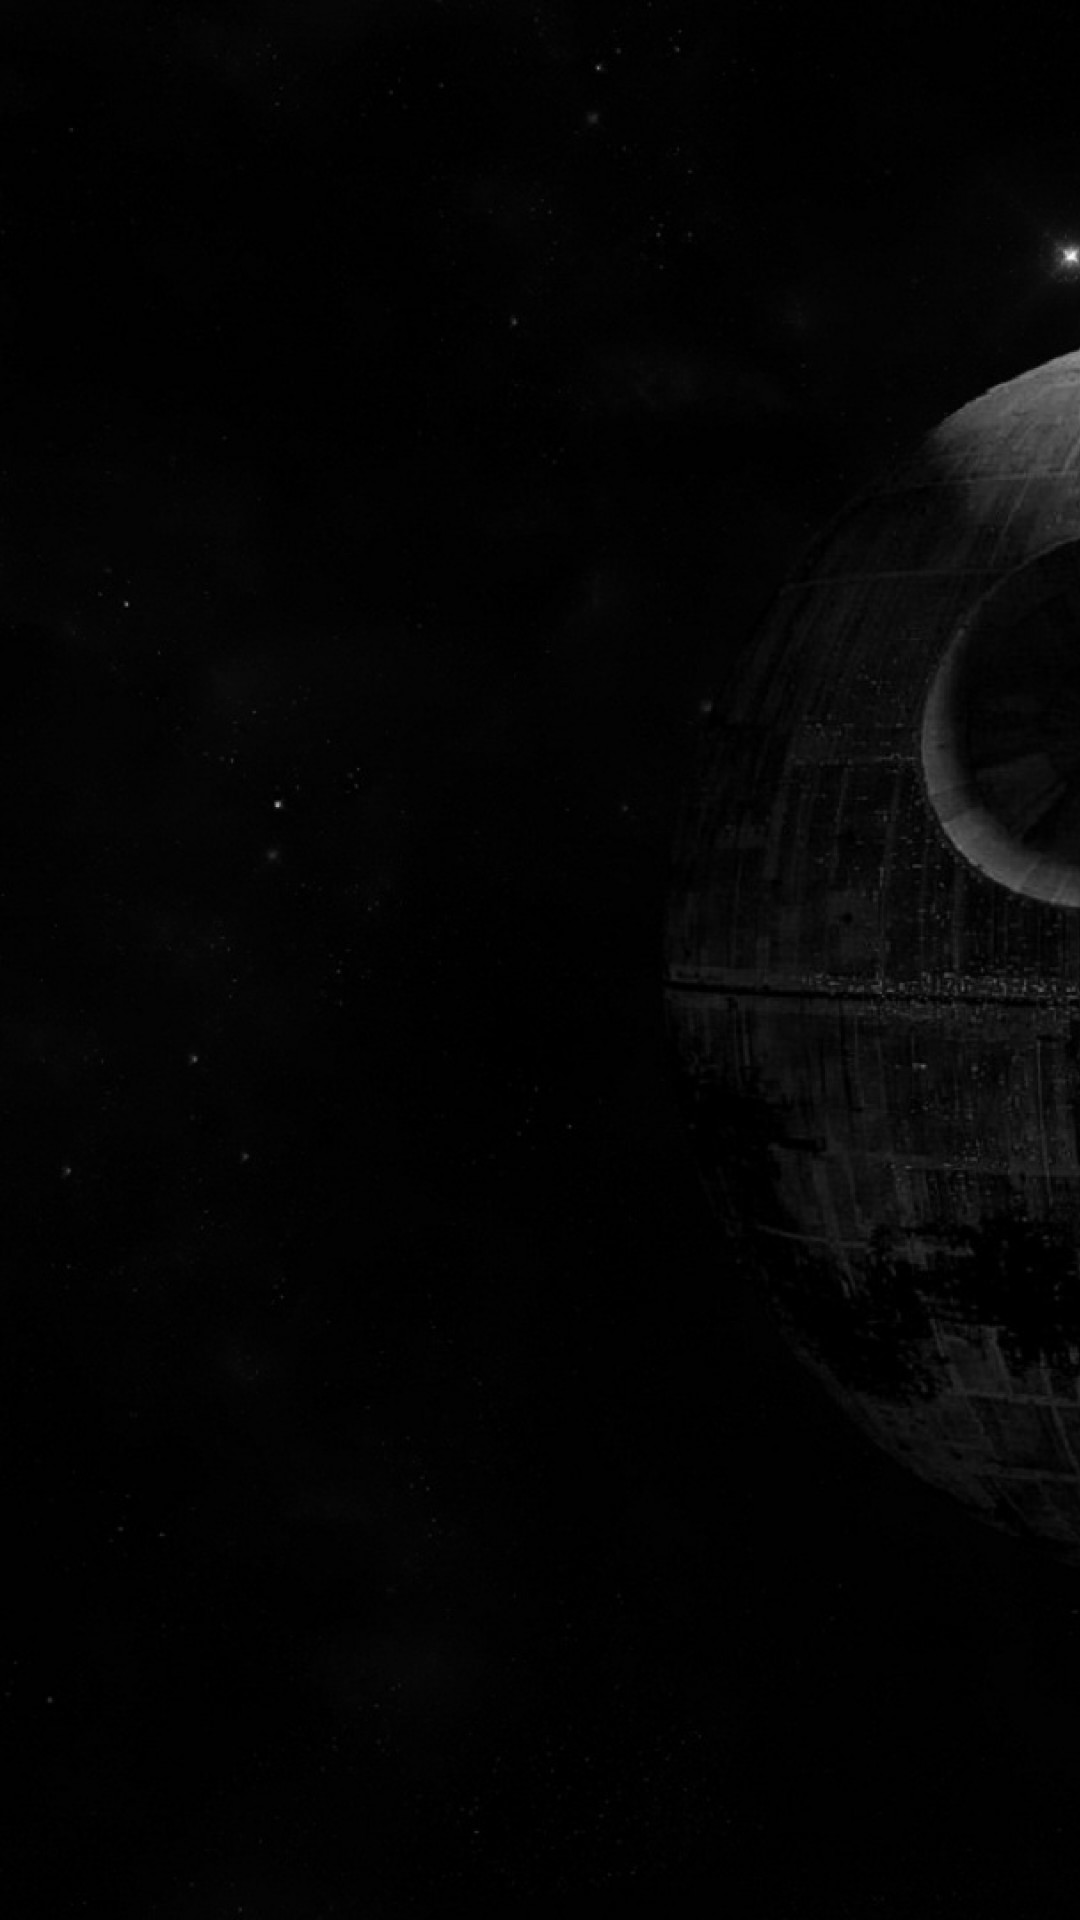 Death Star Iphone Wallpapers